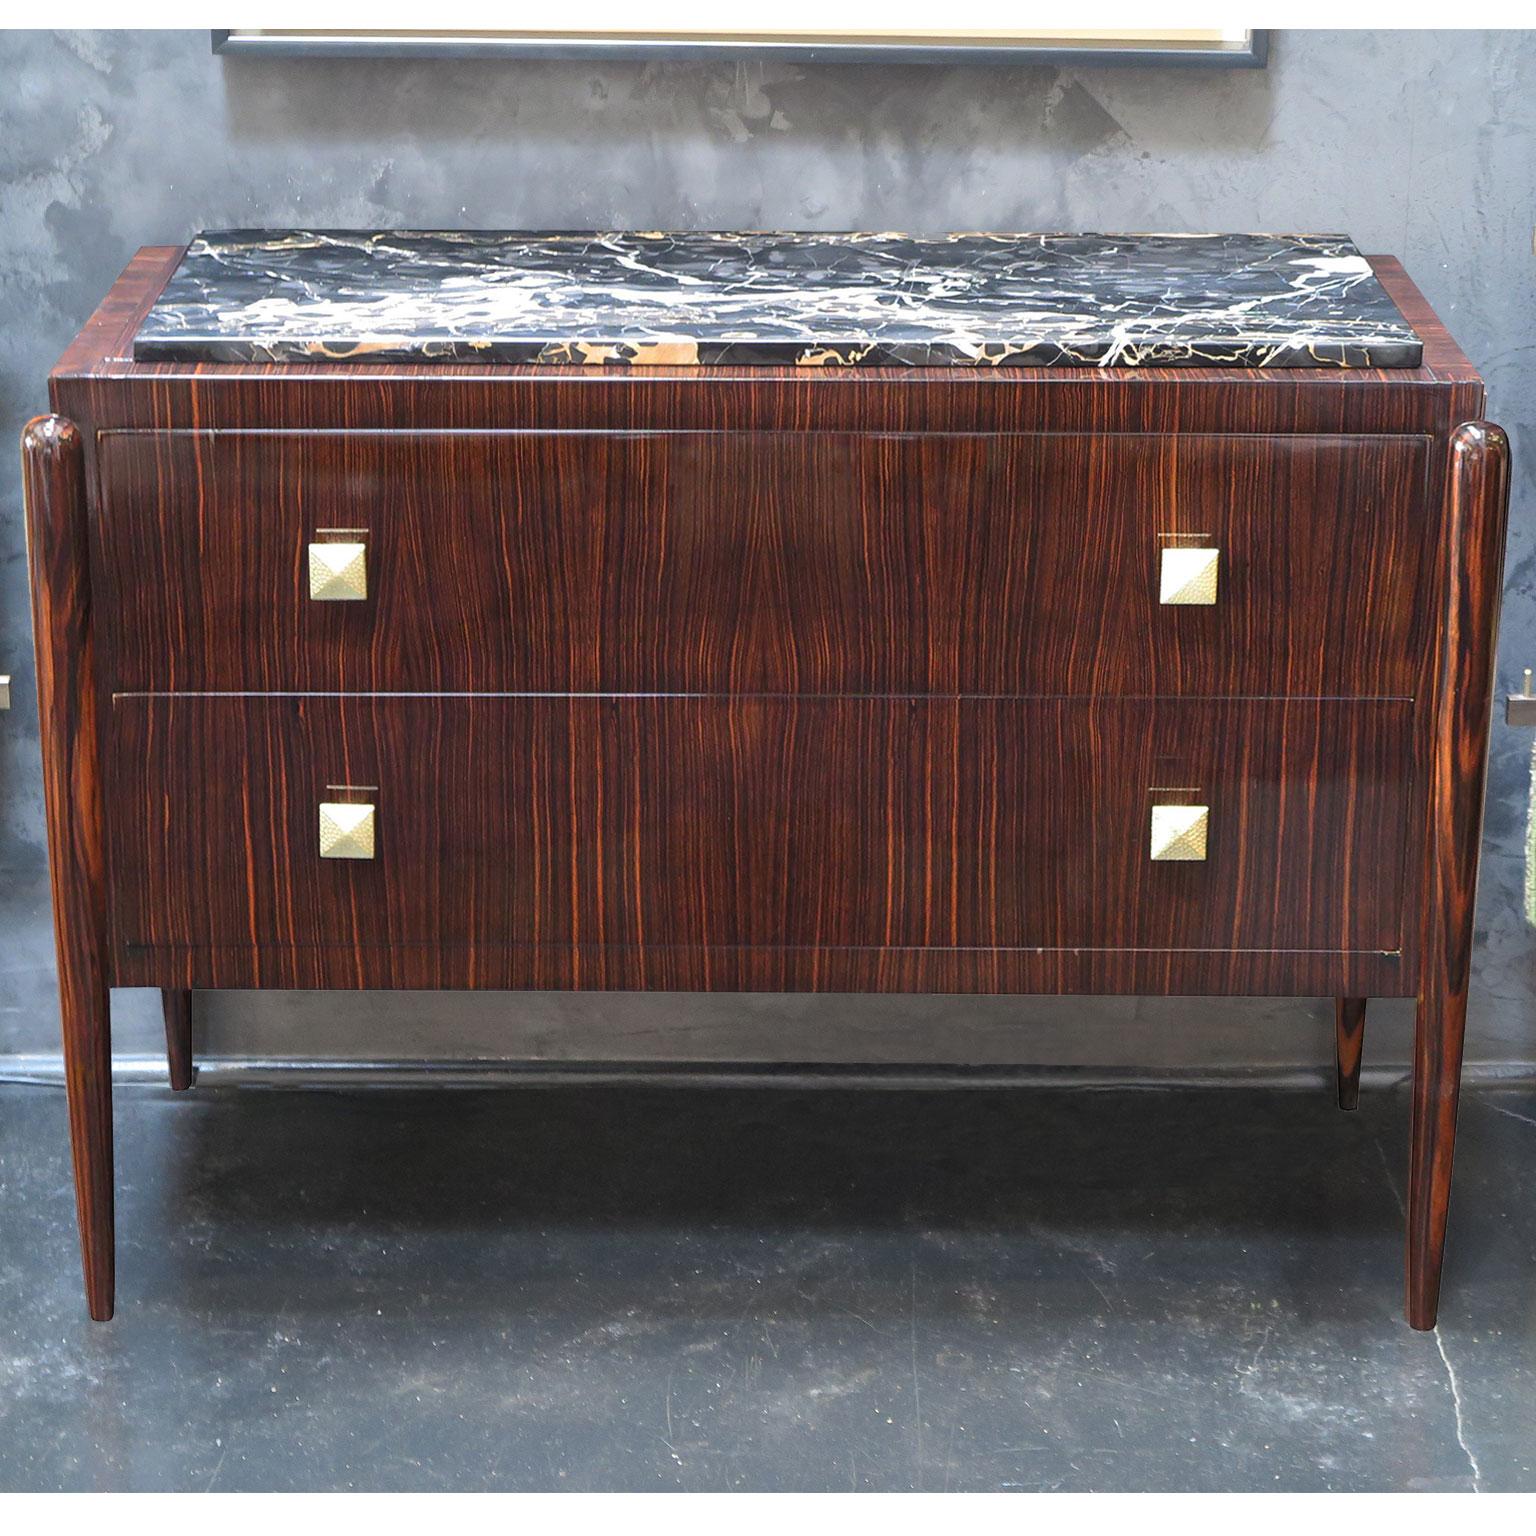 Art Deco dresser with Macassar ebony frame and rounded, tapered legs. Original marble top gives this commode an elegant look and allows for a durable surface. Two drawers, with hammered brass hardware, offer ample storage space . 
Dresser is in